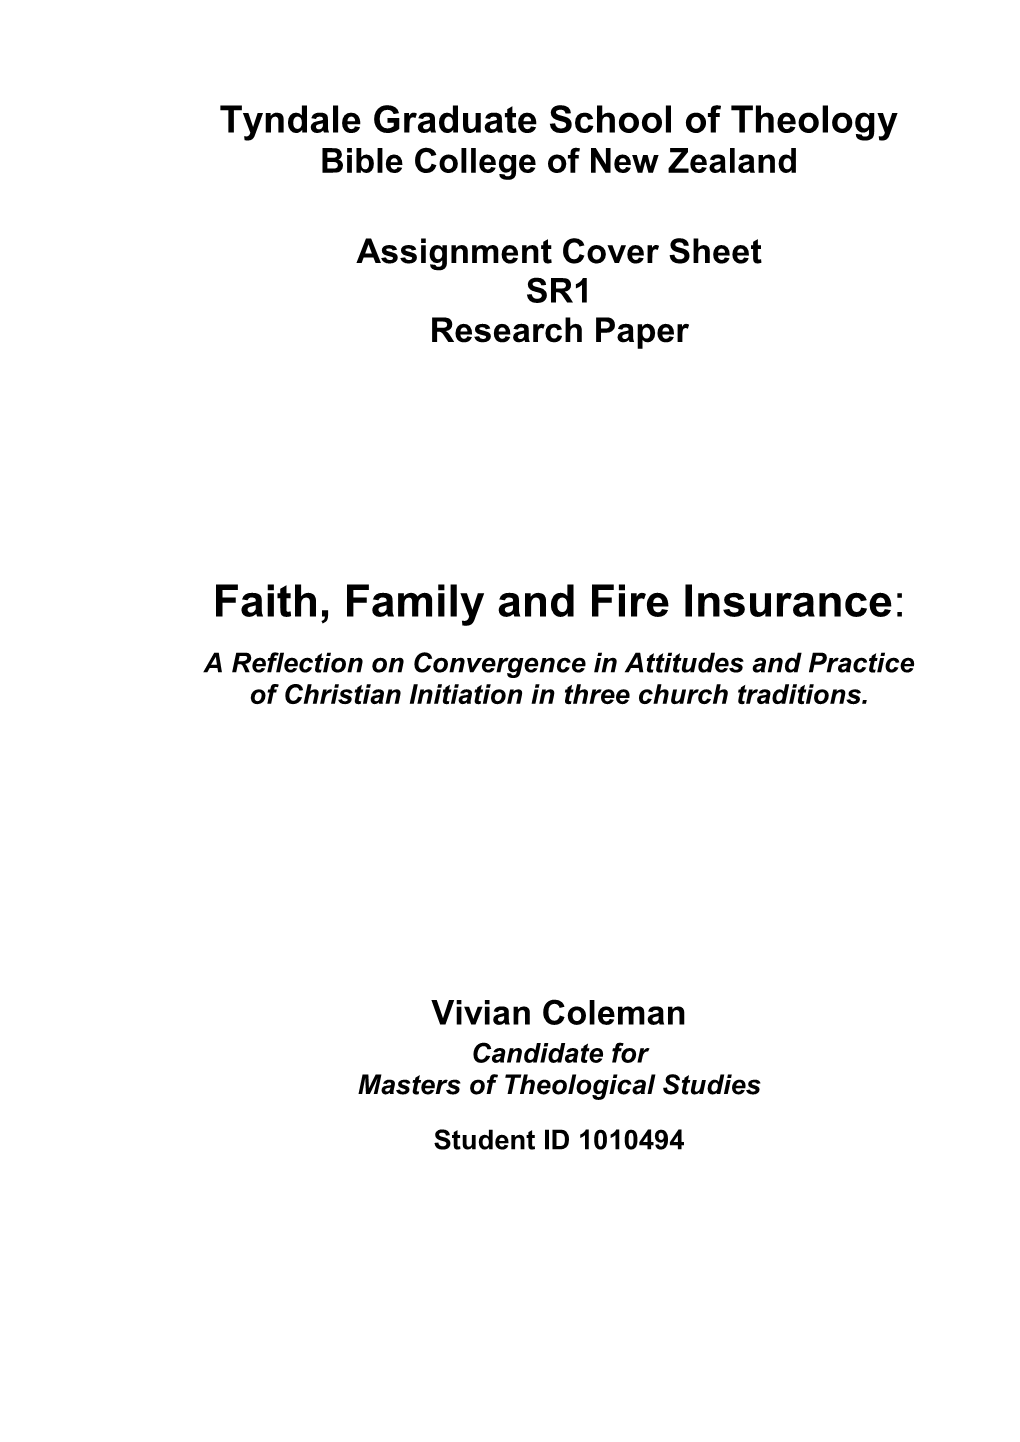 Faith, Family and Fire Insurance: a Reflection on Convergence in Attitudes and Practice of Christian Initiation in Three Church Traditions